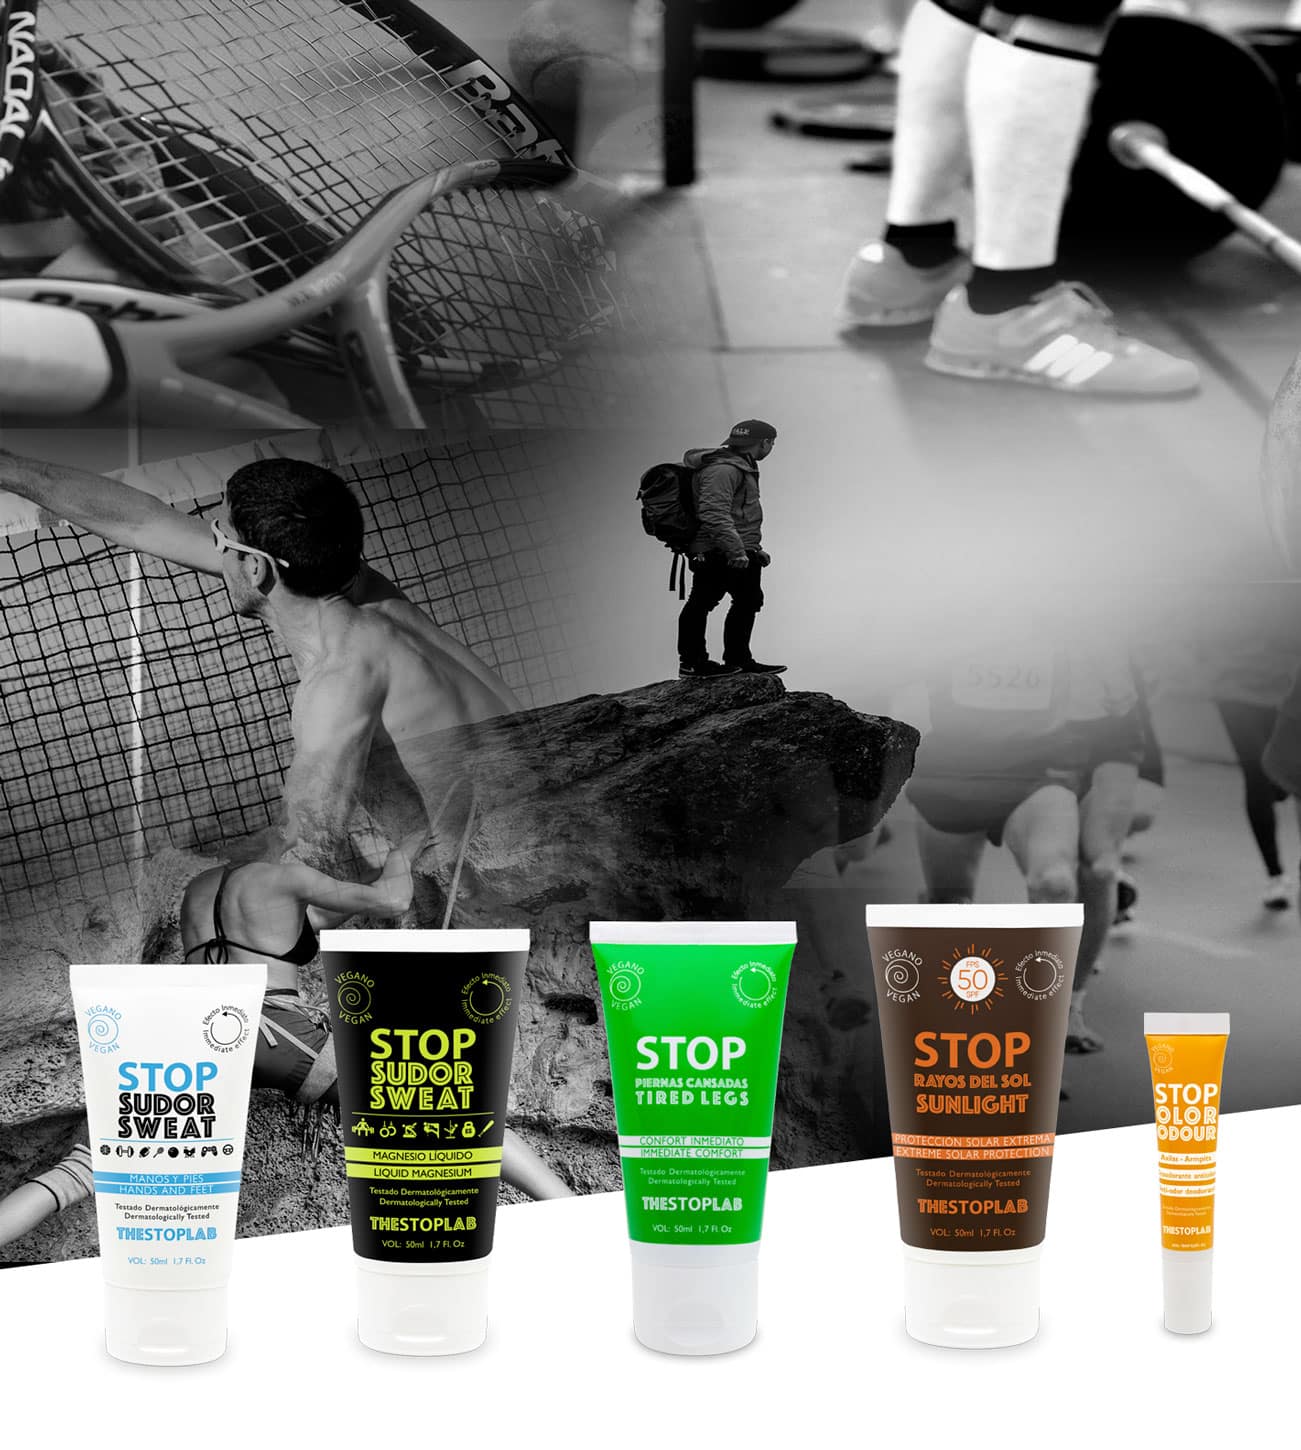 THE STOP LAB - PRODUCTS